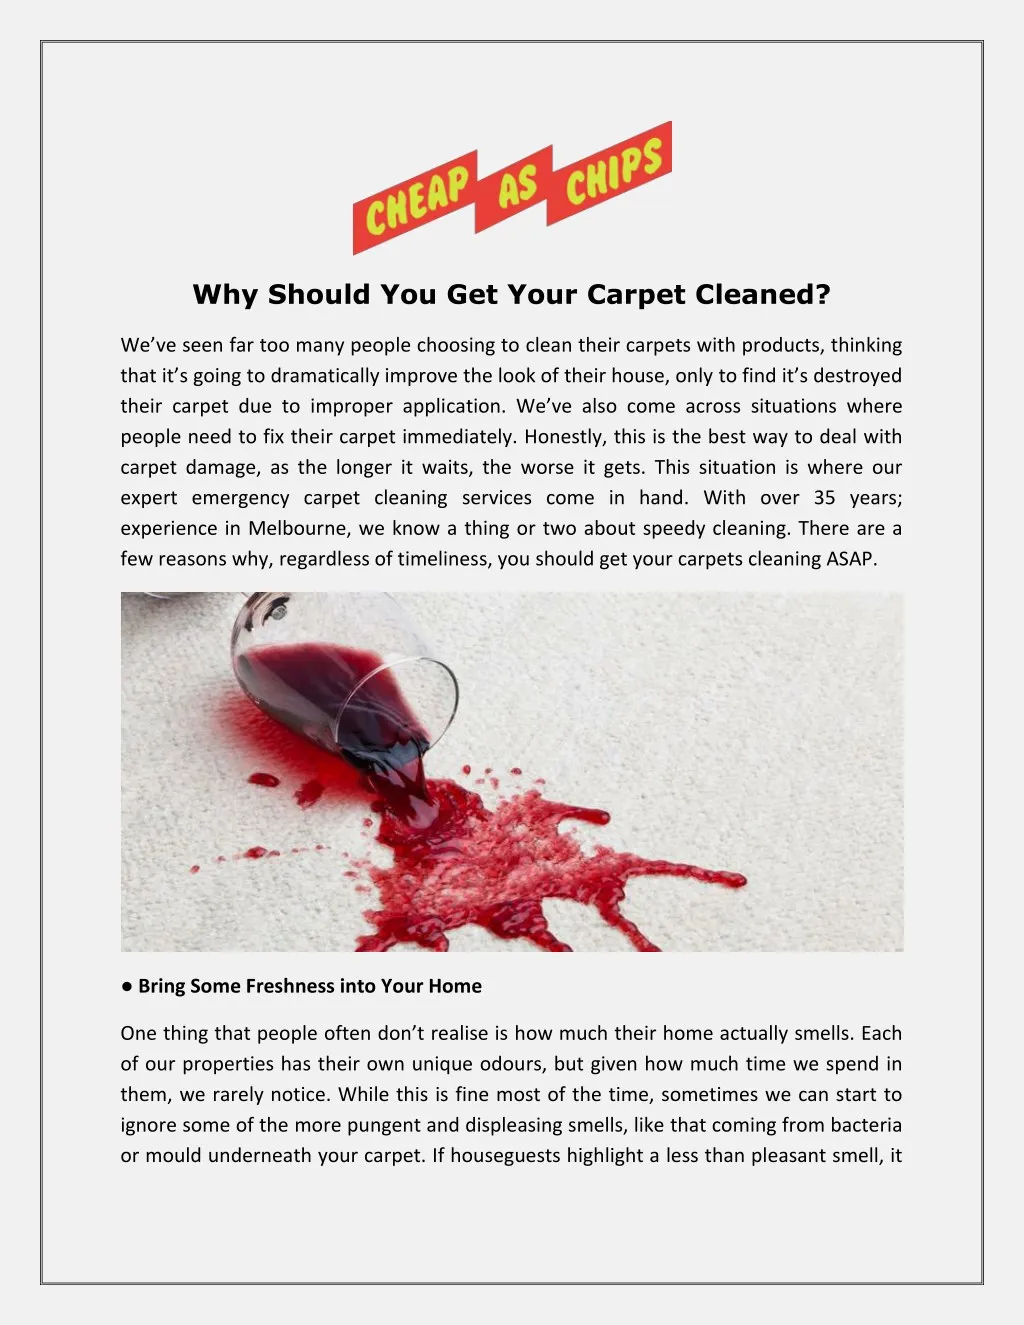 why should you get your carpet cleaned